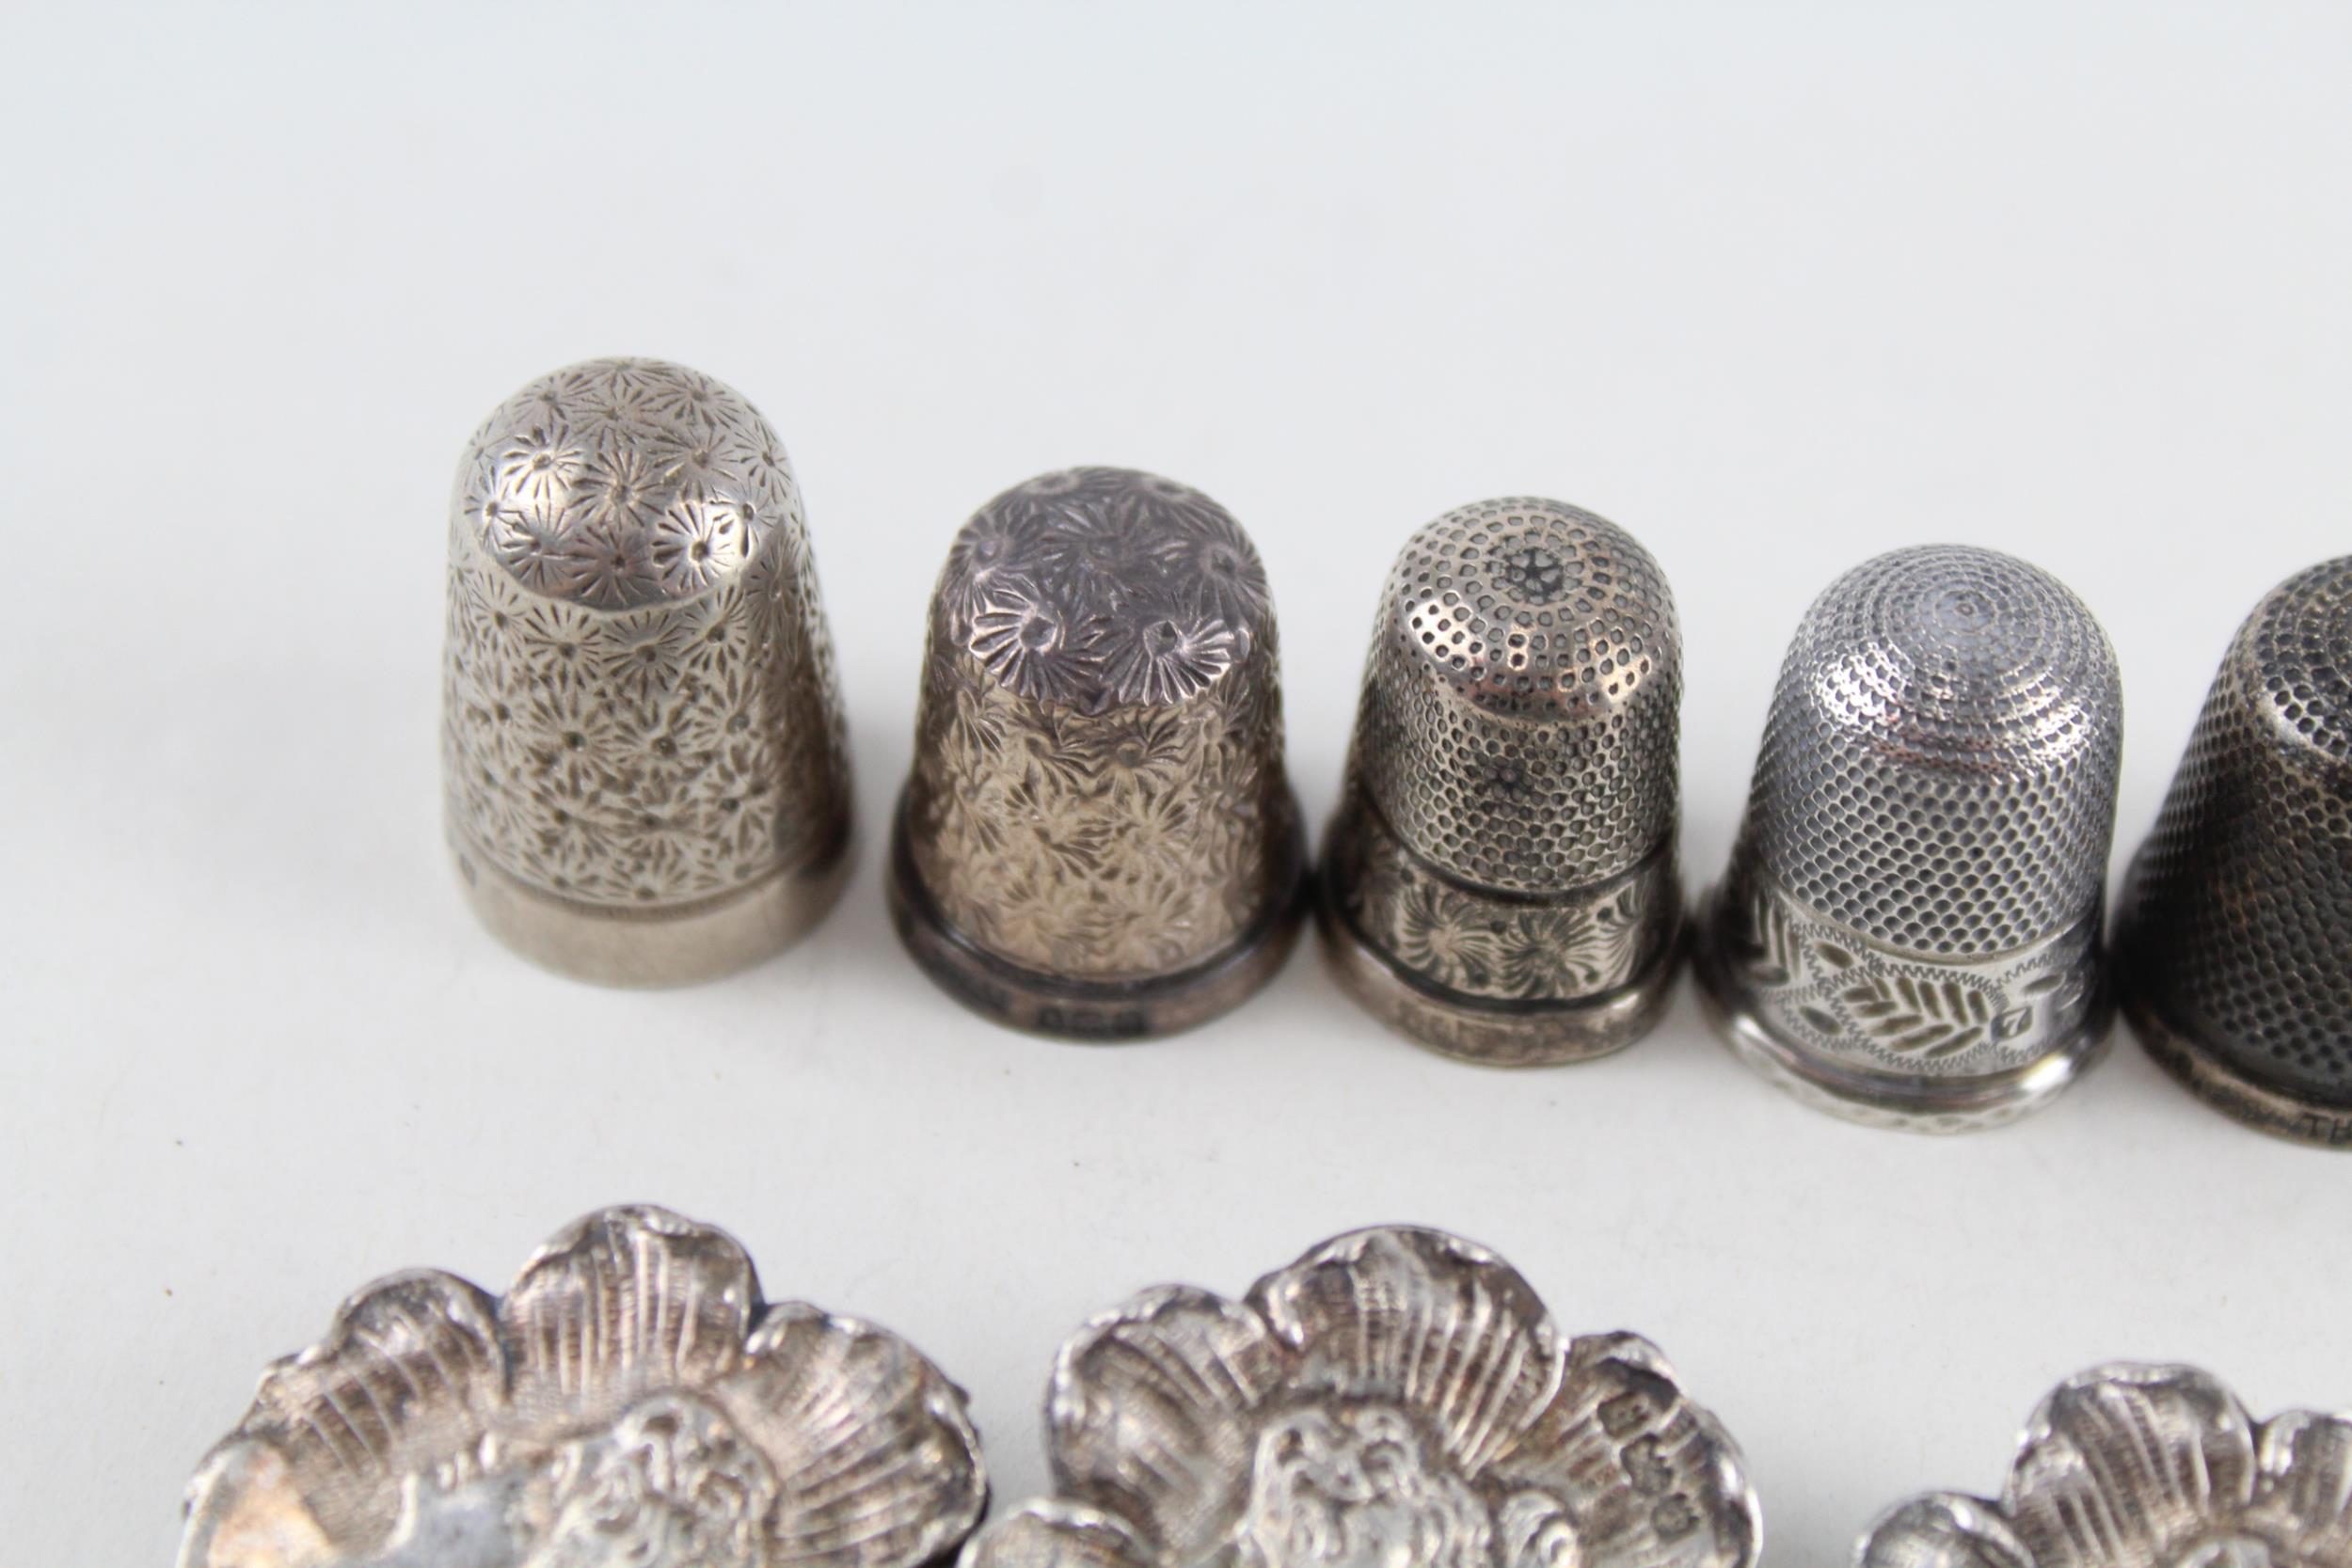 8 x Antique / Vintage Hallmarked .925 STERLING SILVER Thimbles & Buttons (49g) - Inc Charles Horner, - Image 4 of 5